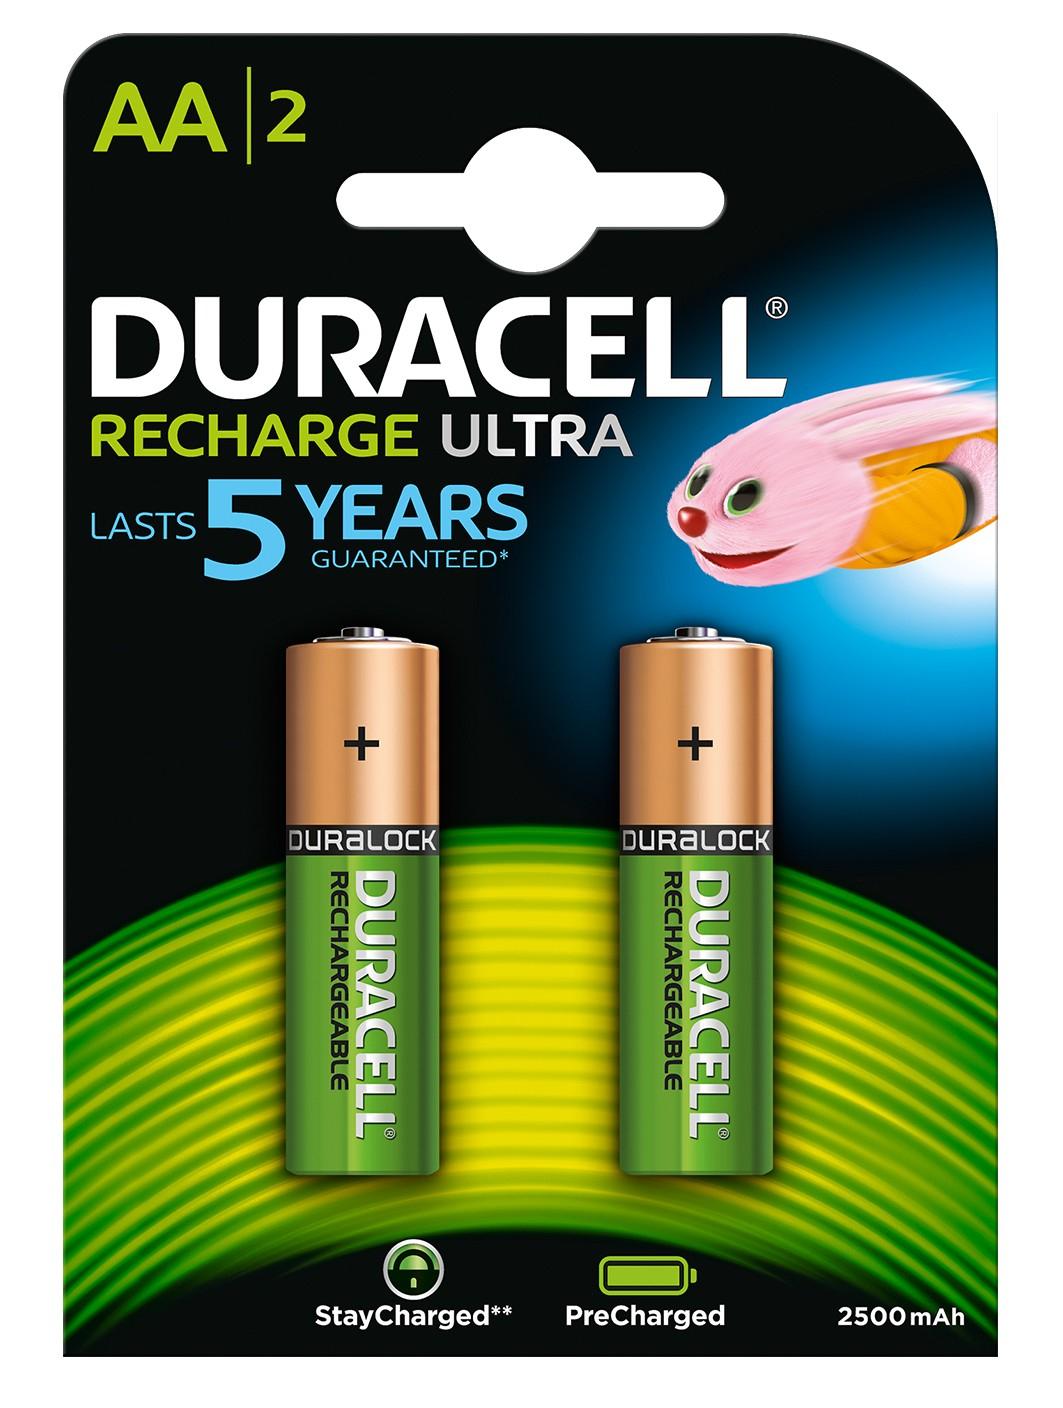 Duracell Recharge Ultra AA